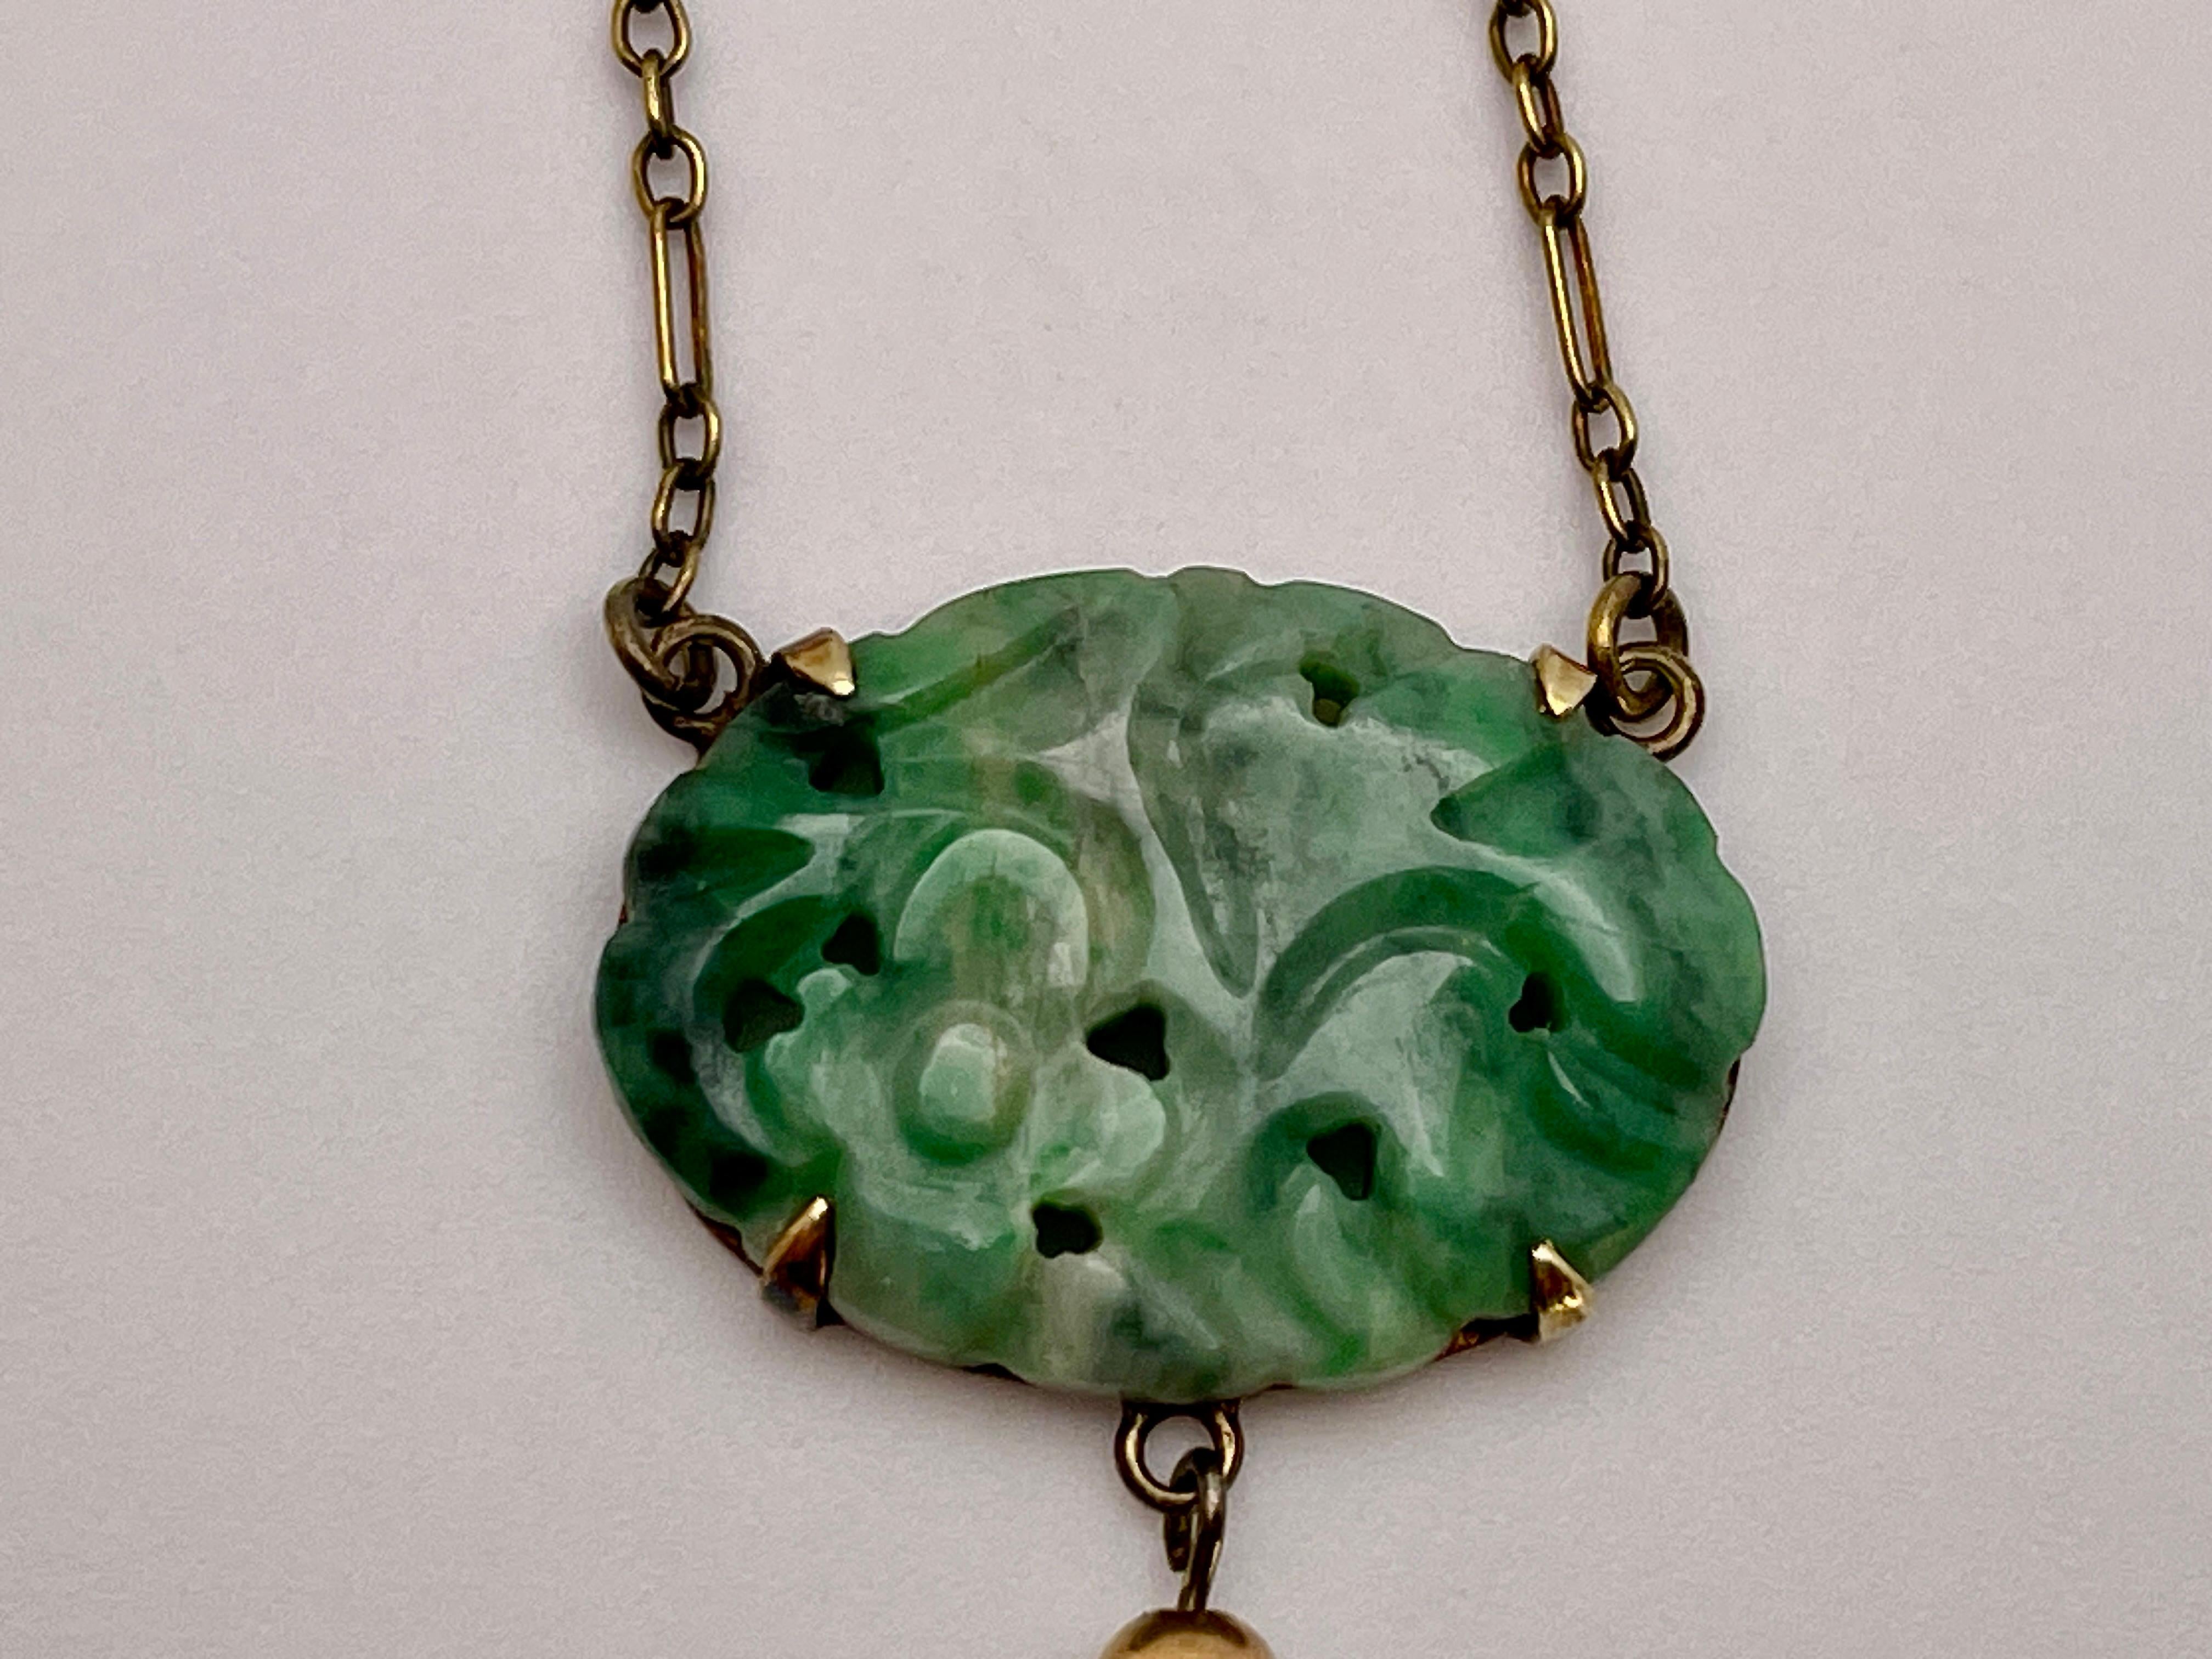 Certified Victorian 14K Yellow Gold Carved Jade Pendant Necklace For Sale 6